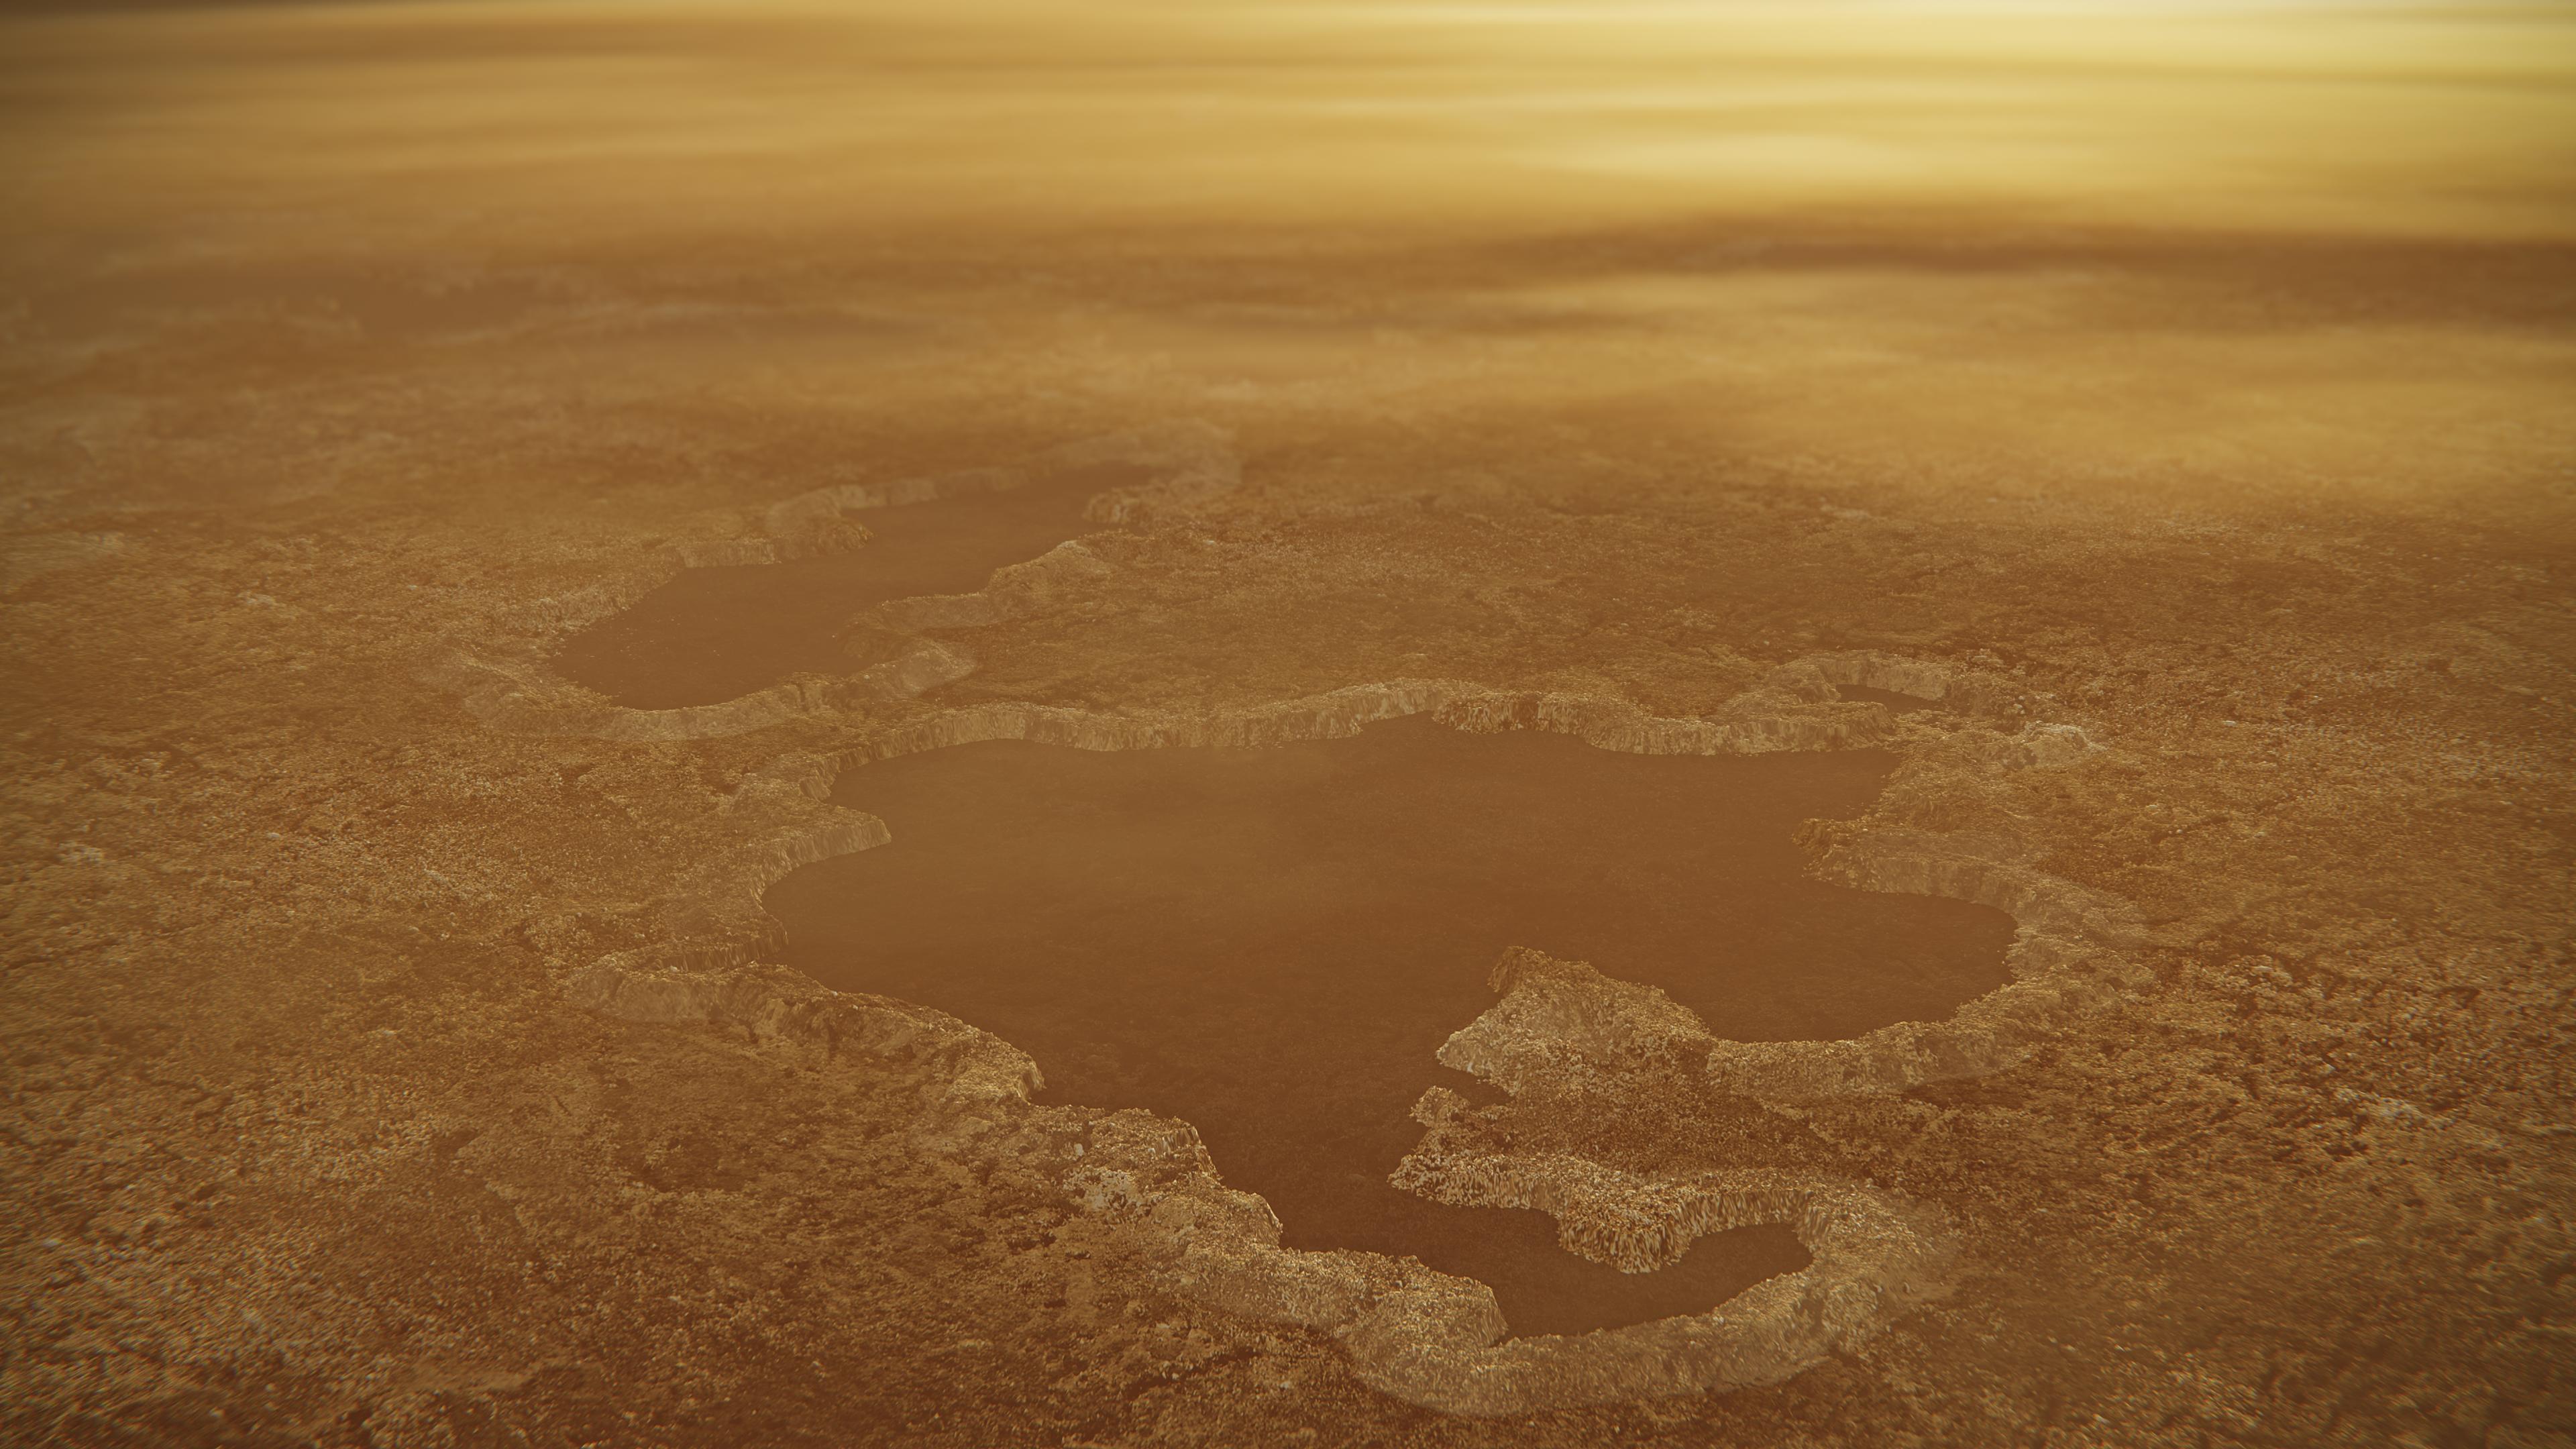 On Titan, the lakes are not water but methane